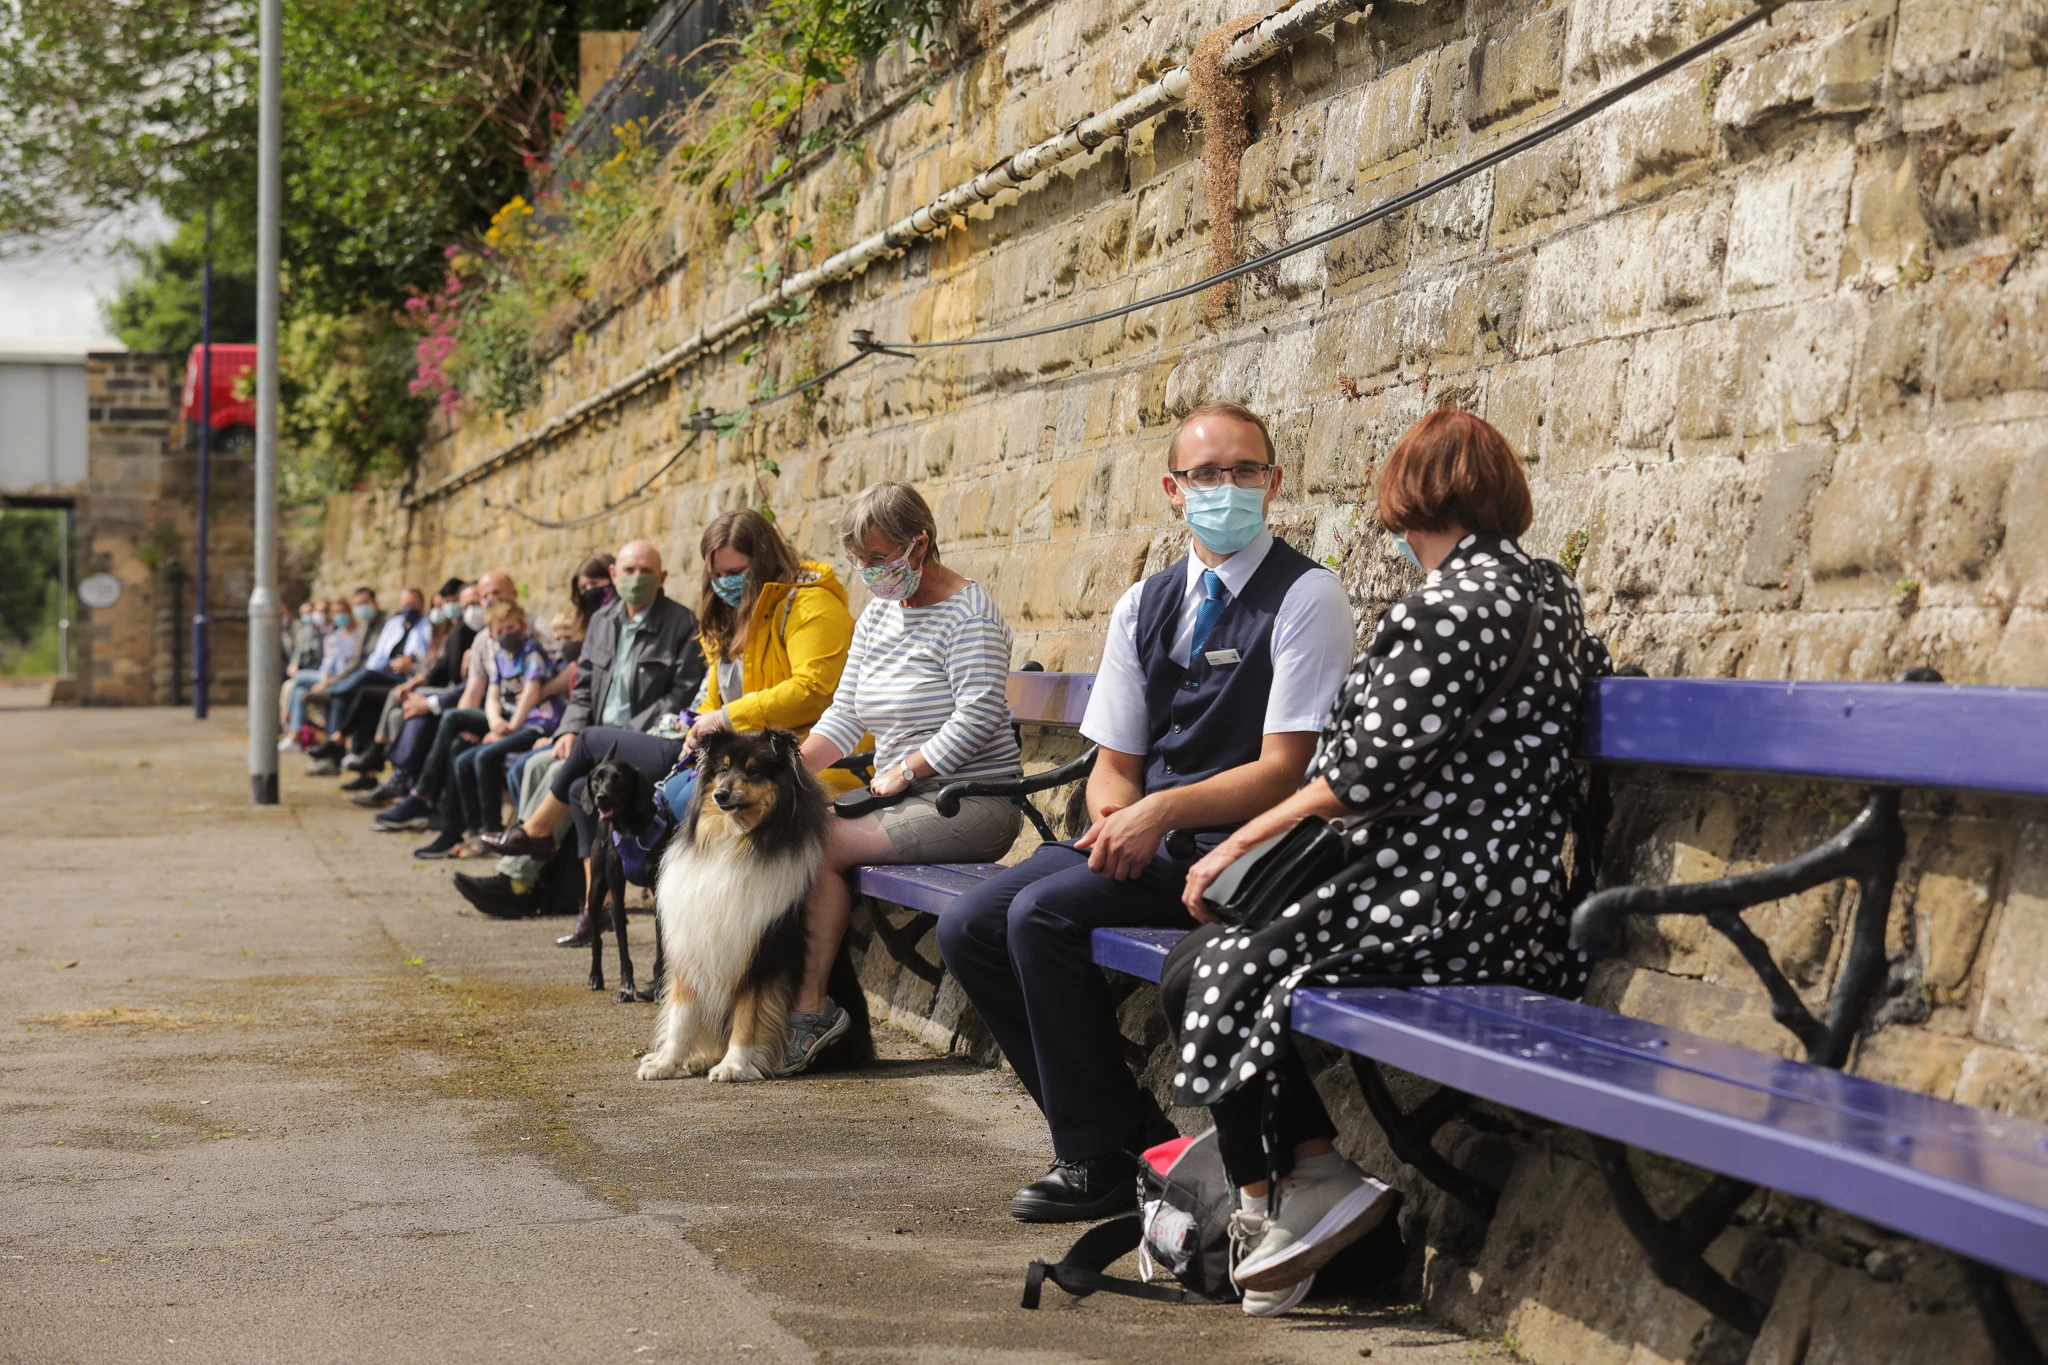 TransPennine Express has launched a ‘chatty bench’ initiative on the world’s longest railway bench in a fight to end loneliness in the UK. 